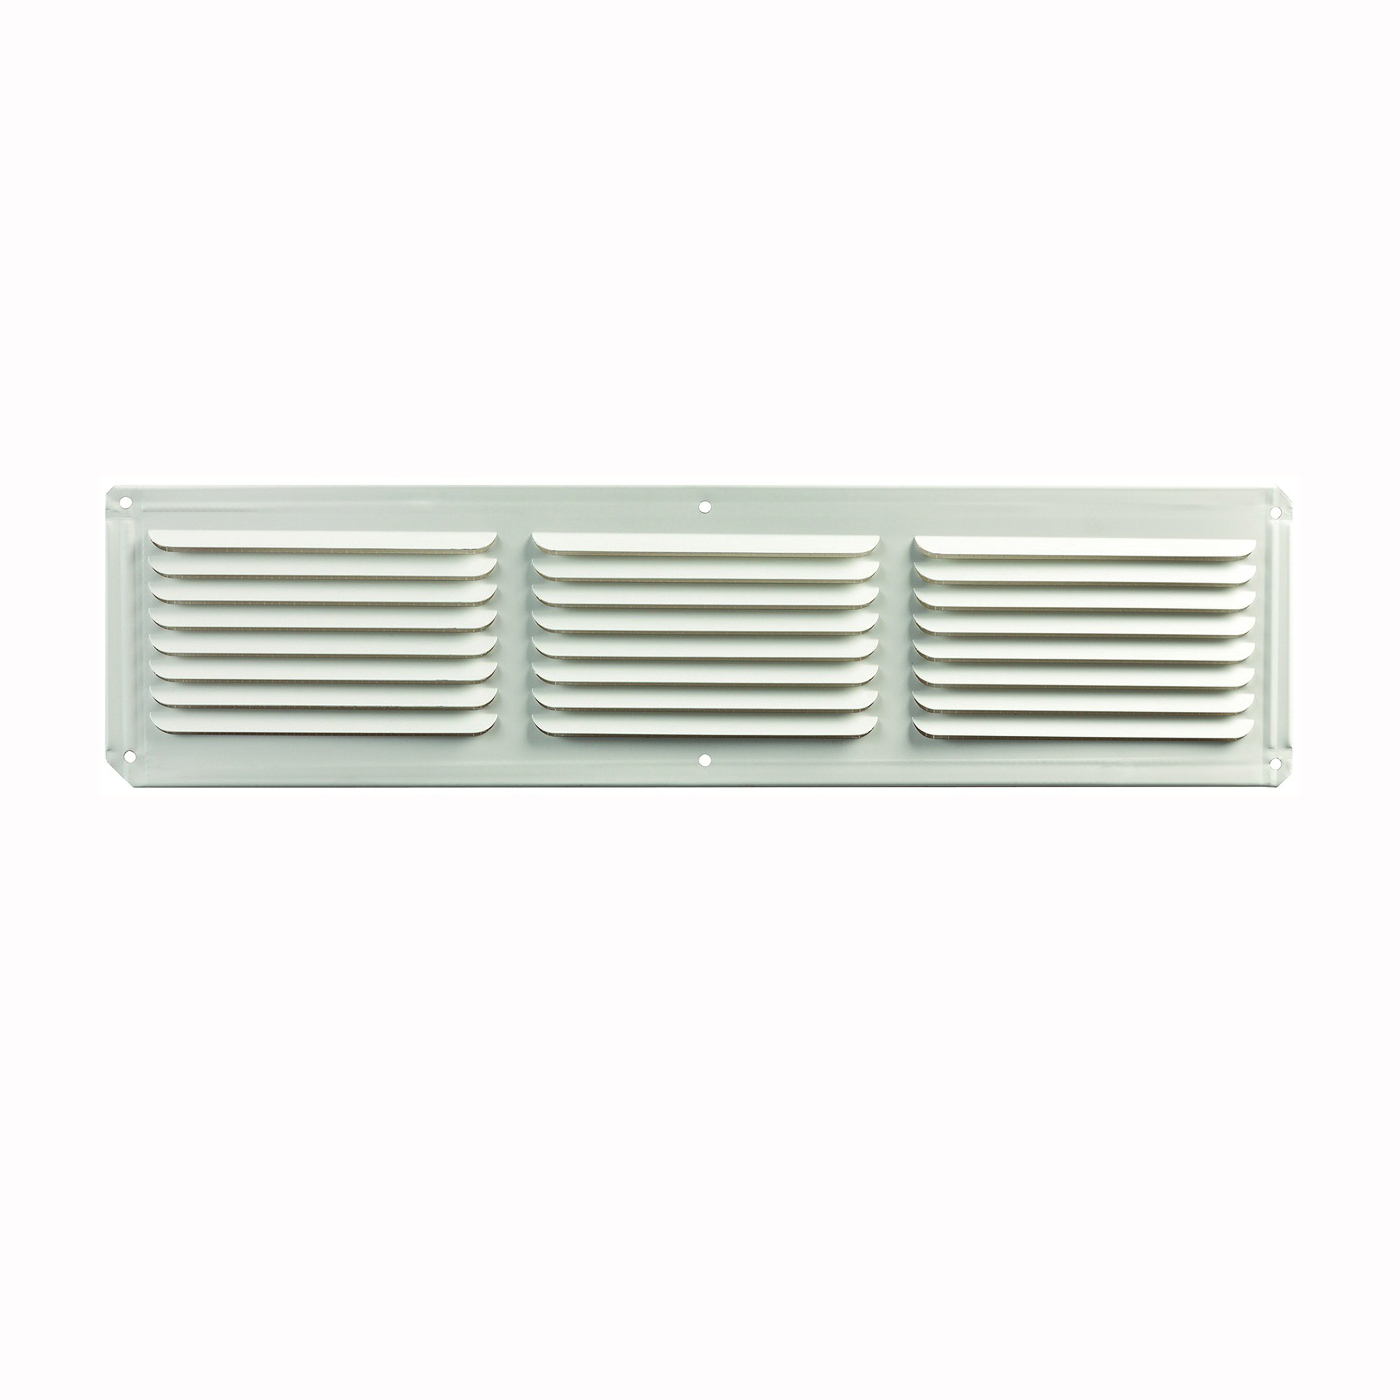 Master Flow EAC16X4W Undereave Vent, 4 in L, 16 in W, 26 sq-ft Net Free Ventilating Area, Aluminum, White - 1